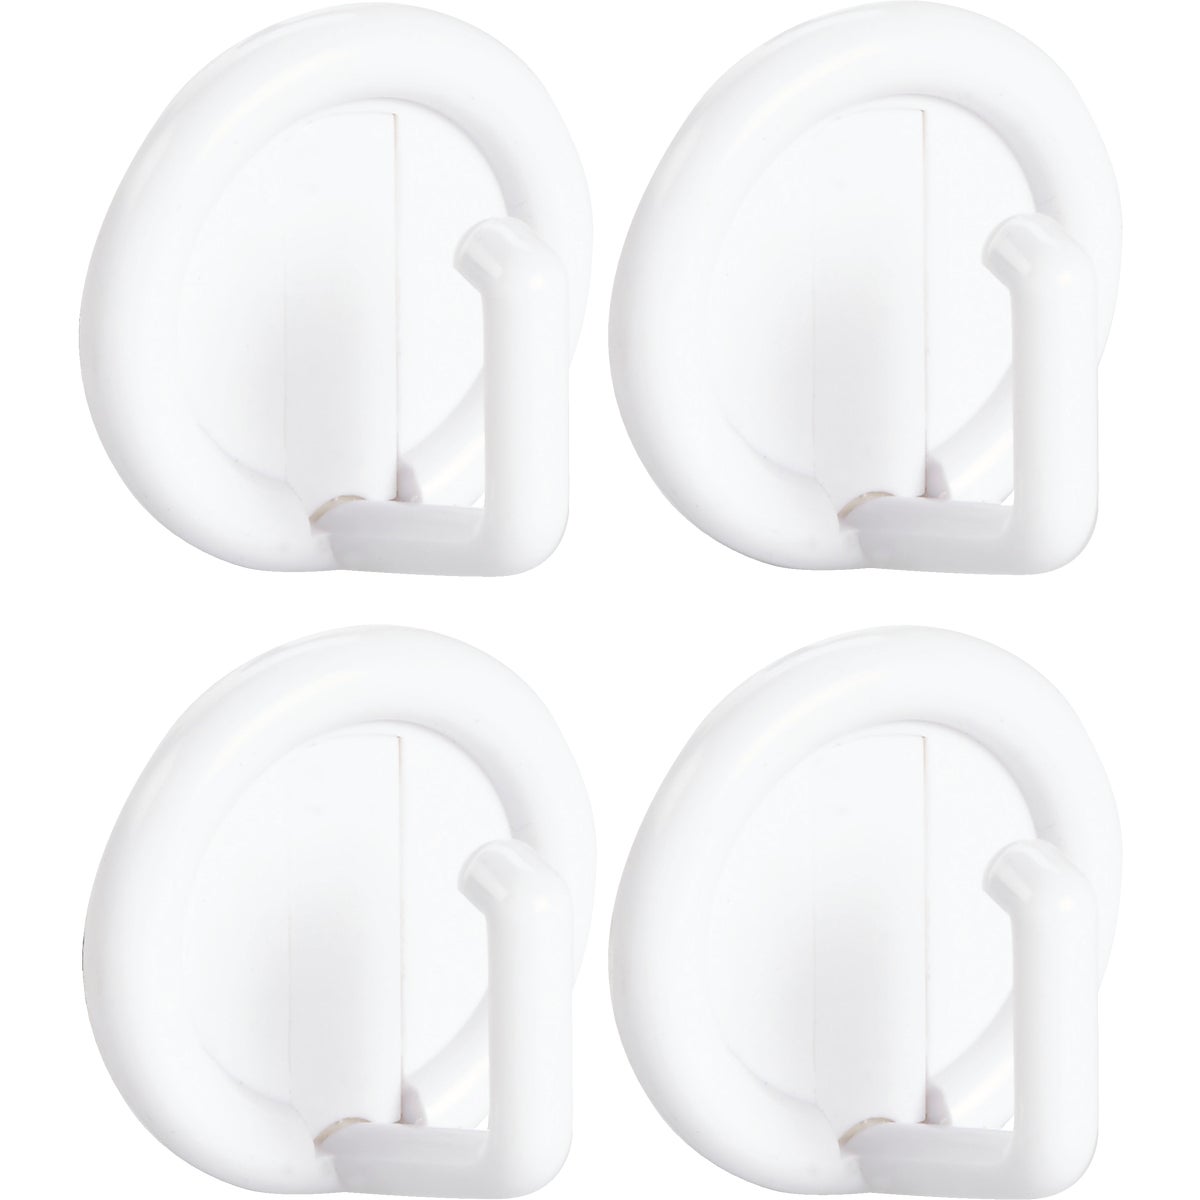 Item 604208, This white self adhesive utility hook has a round design.